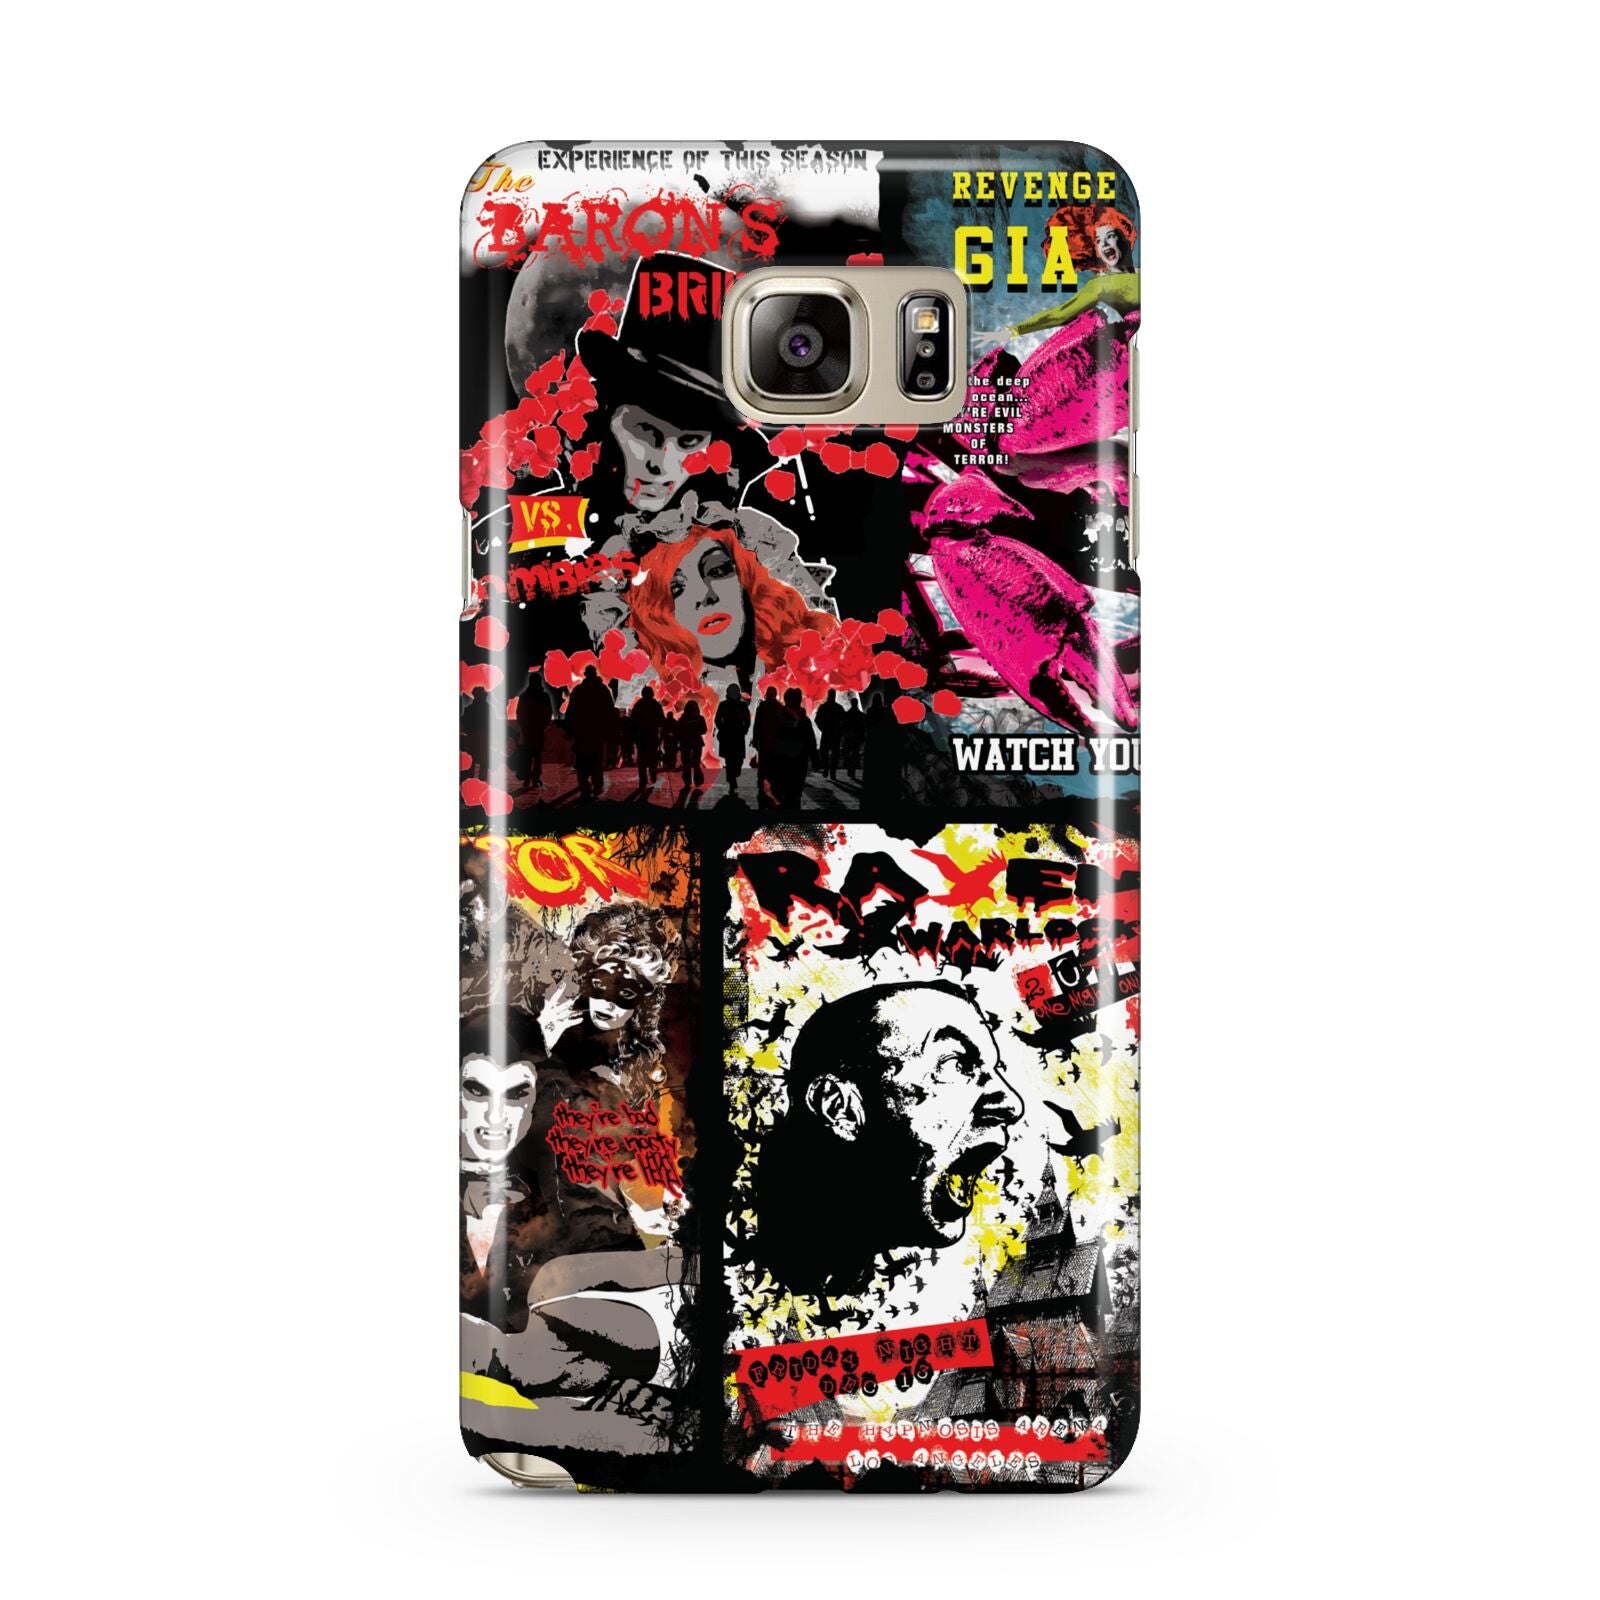 B Movie Posters Samsung Galaxy Note 5 Case